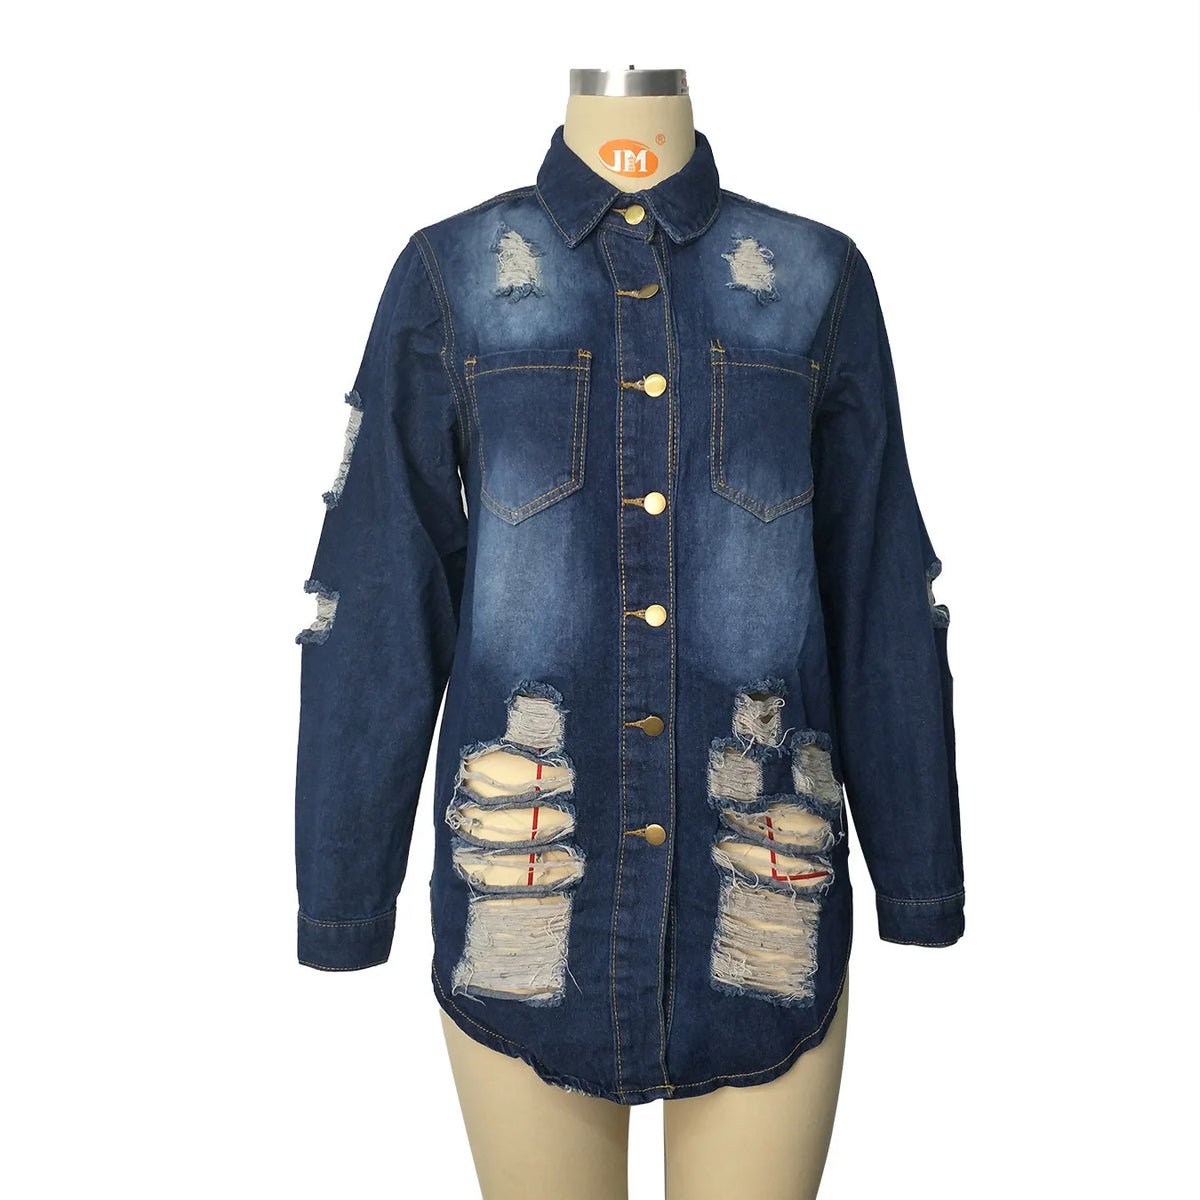 Plus Size Patchwork Ripped Denim Trench Coat – Women’s 3XL Jean Jacket, Spring 2023